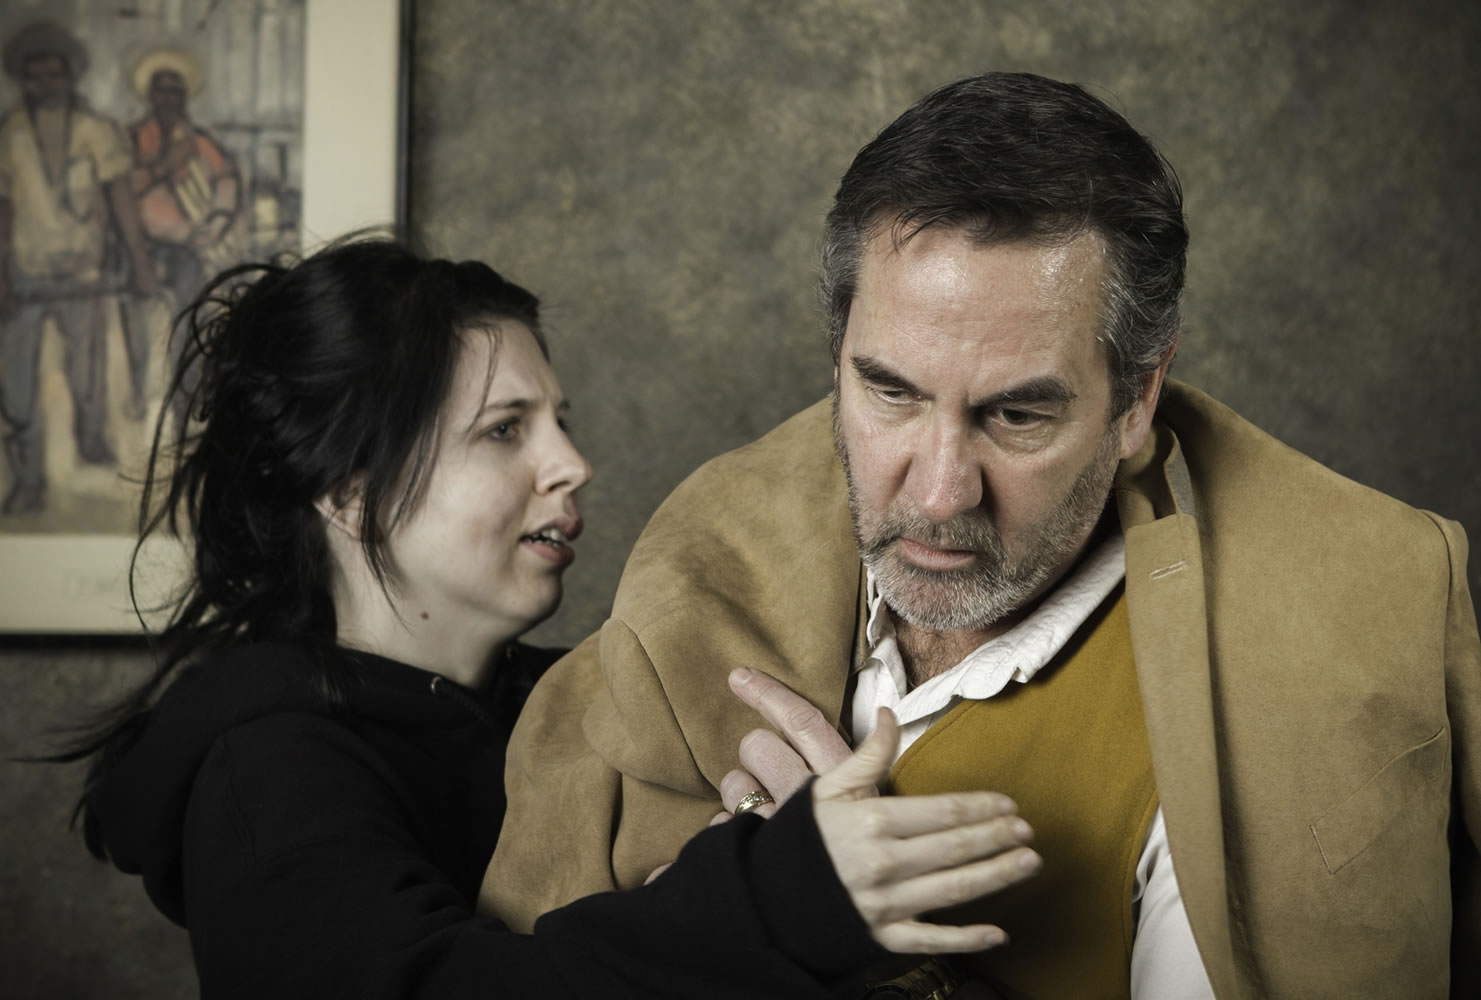 The Serendipity Players presents &quot;Proof&quot; staring Valerie Martinka and David Hudkins, through March 31 at the Serendipity Playhouse in Vancouver.